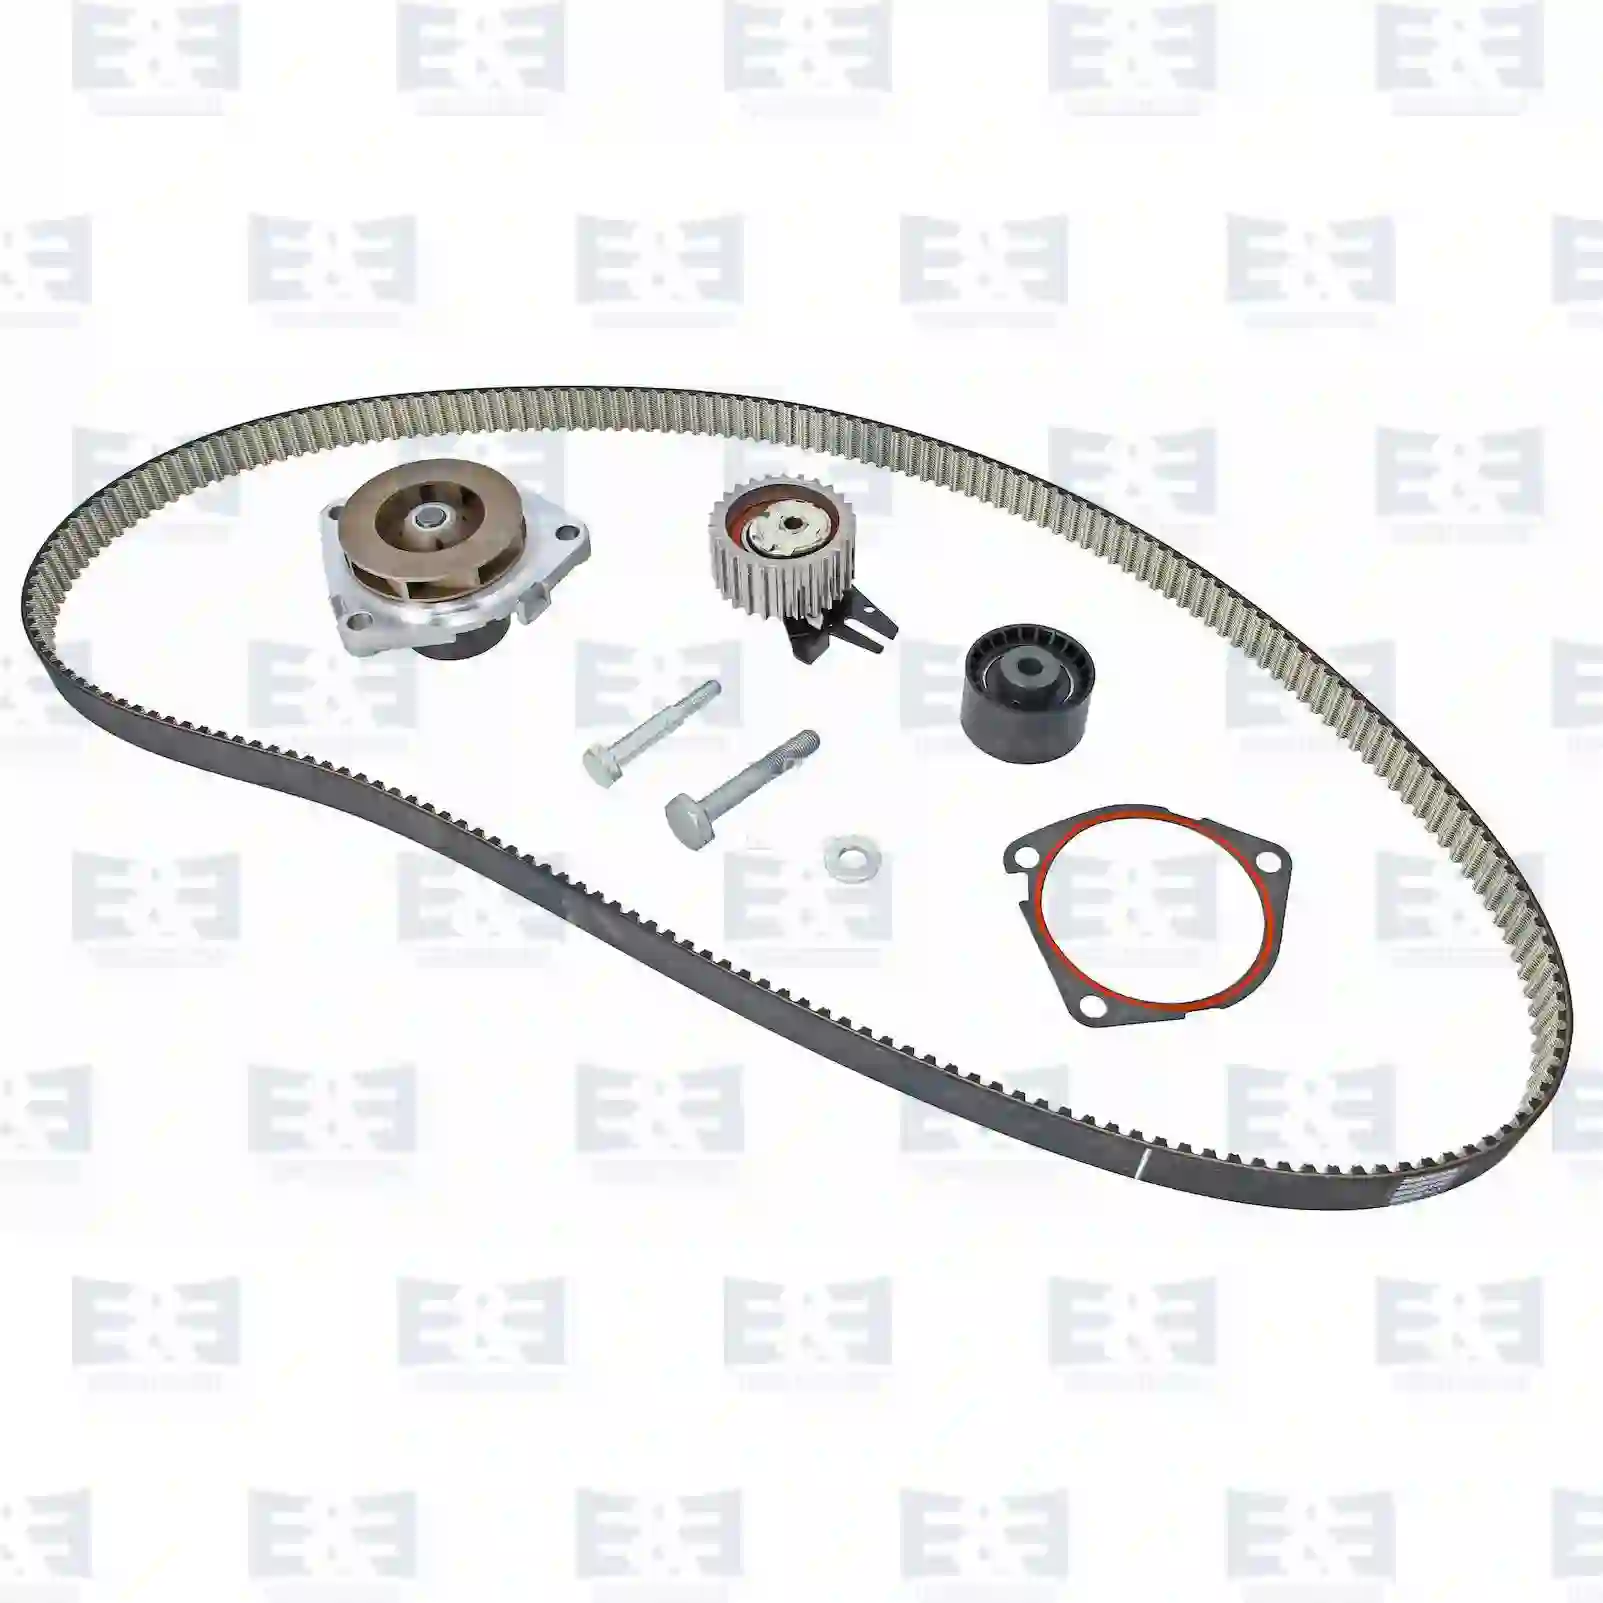 Timing belt kit, with water pump, 2E2203799, 71771579 ||  2E2203799 E&E Truck Spare Parts | Truck Spare Parts, Auotomotive Spare Parts Timing belt kit, with water pump, 2E2203799, 71771579 ||  2E2203799 E&E Truck Spare Parts | Truck Spare Parts, Auotomotive Spare Parts